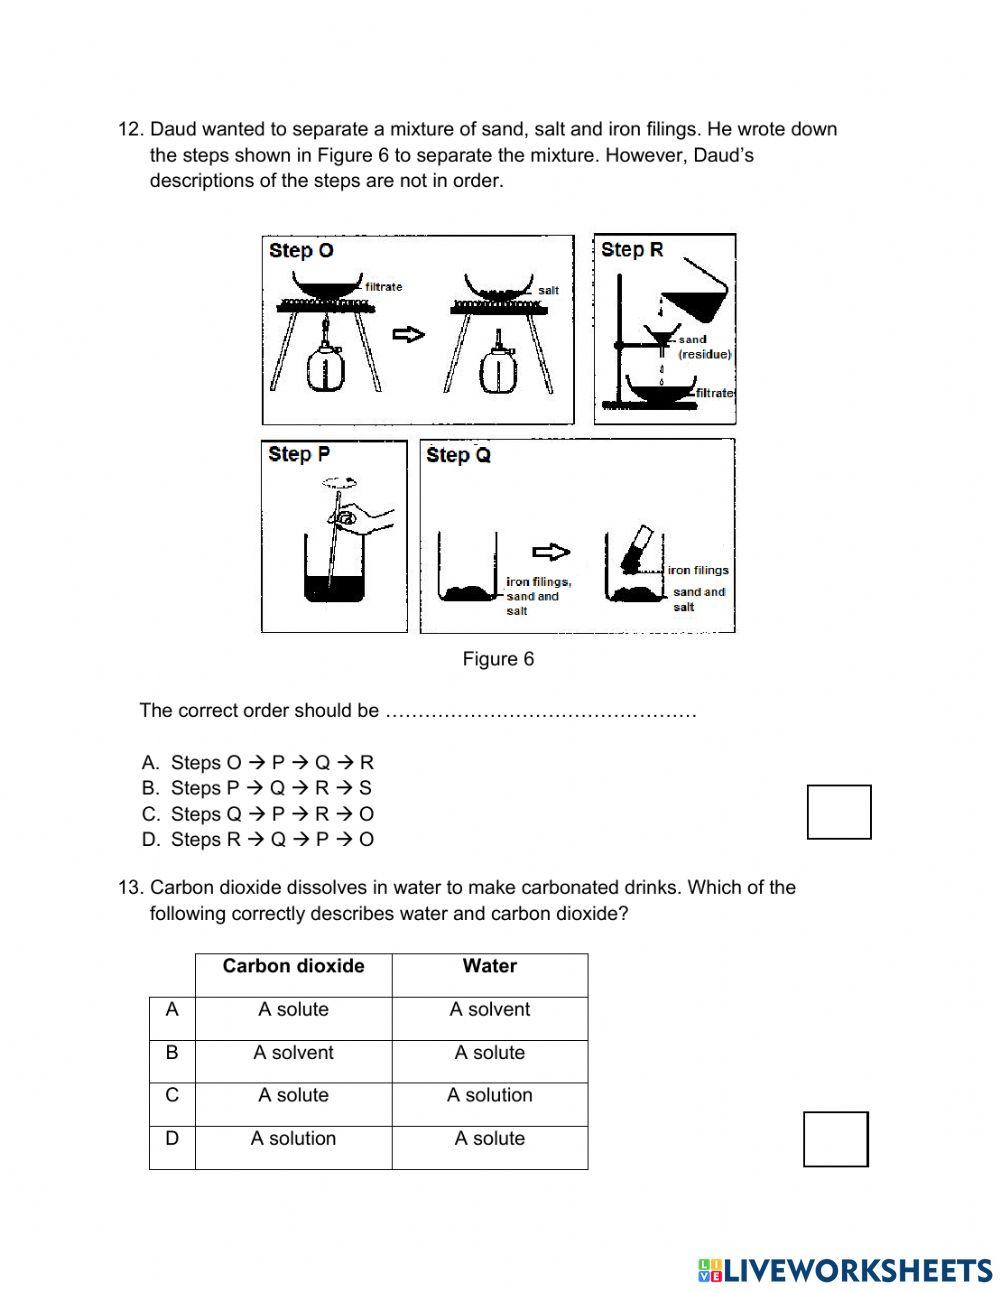 Year 8 online examination (question 11 to 20)